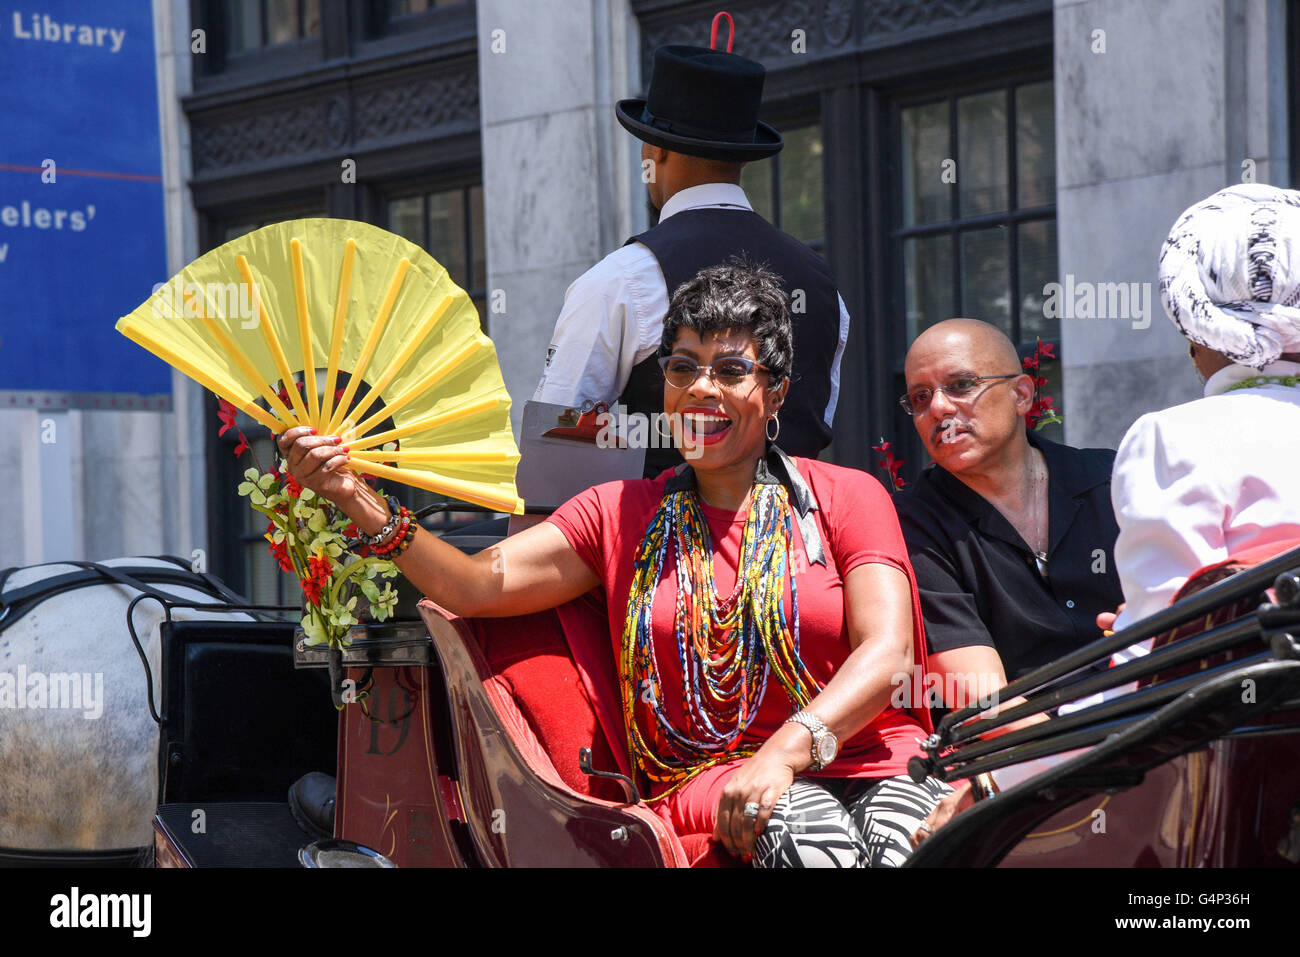 Philadelphia, Pennsylvania, USA. 18th June, 2016. Actress SHERYL LEE RALPH and her husband State Senator, VINCENT HUGHES, at the Juneteenth Celebration in Philadelphia Pa Juneteenth is the oldest known celebration commemorating the ending of slavery in the United States © Ricky Fitchett/ZUMA Wire/Alamy Live News Stock Photo